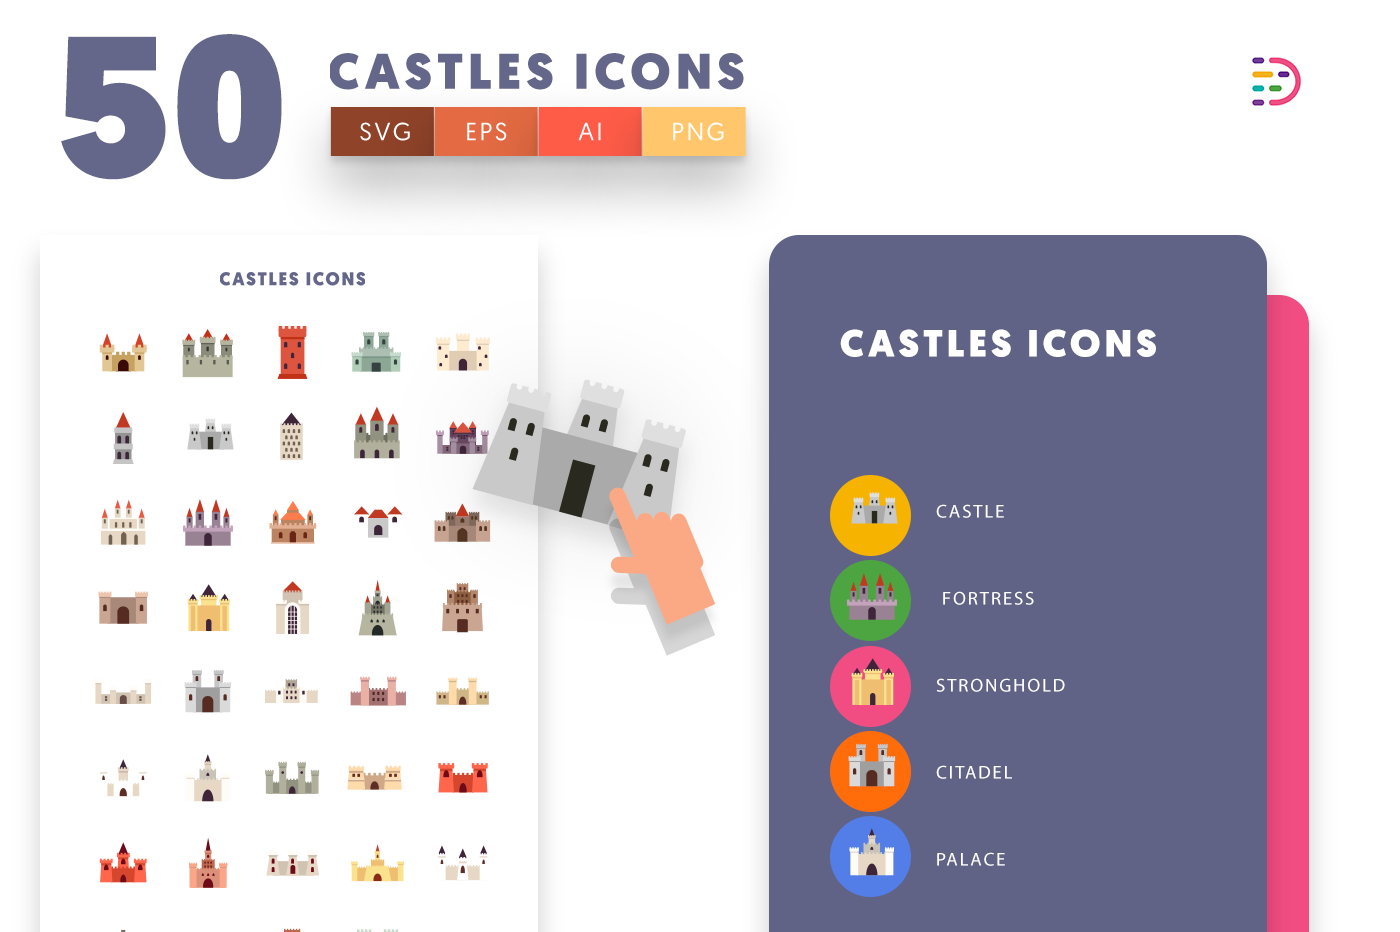 50 Castle Icons with colored backgrounds